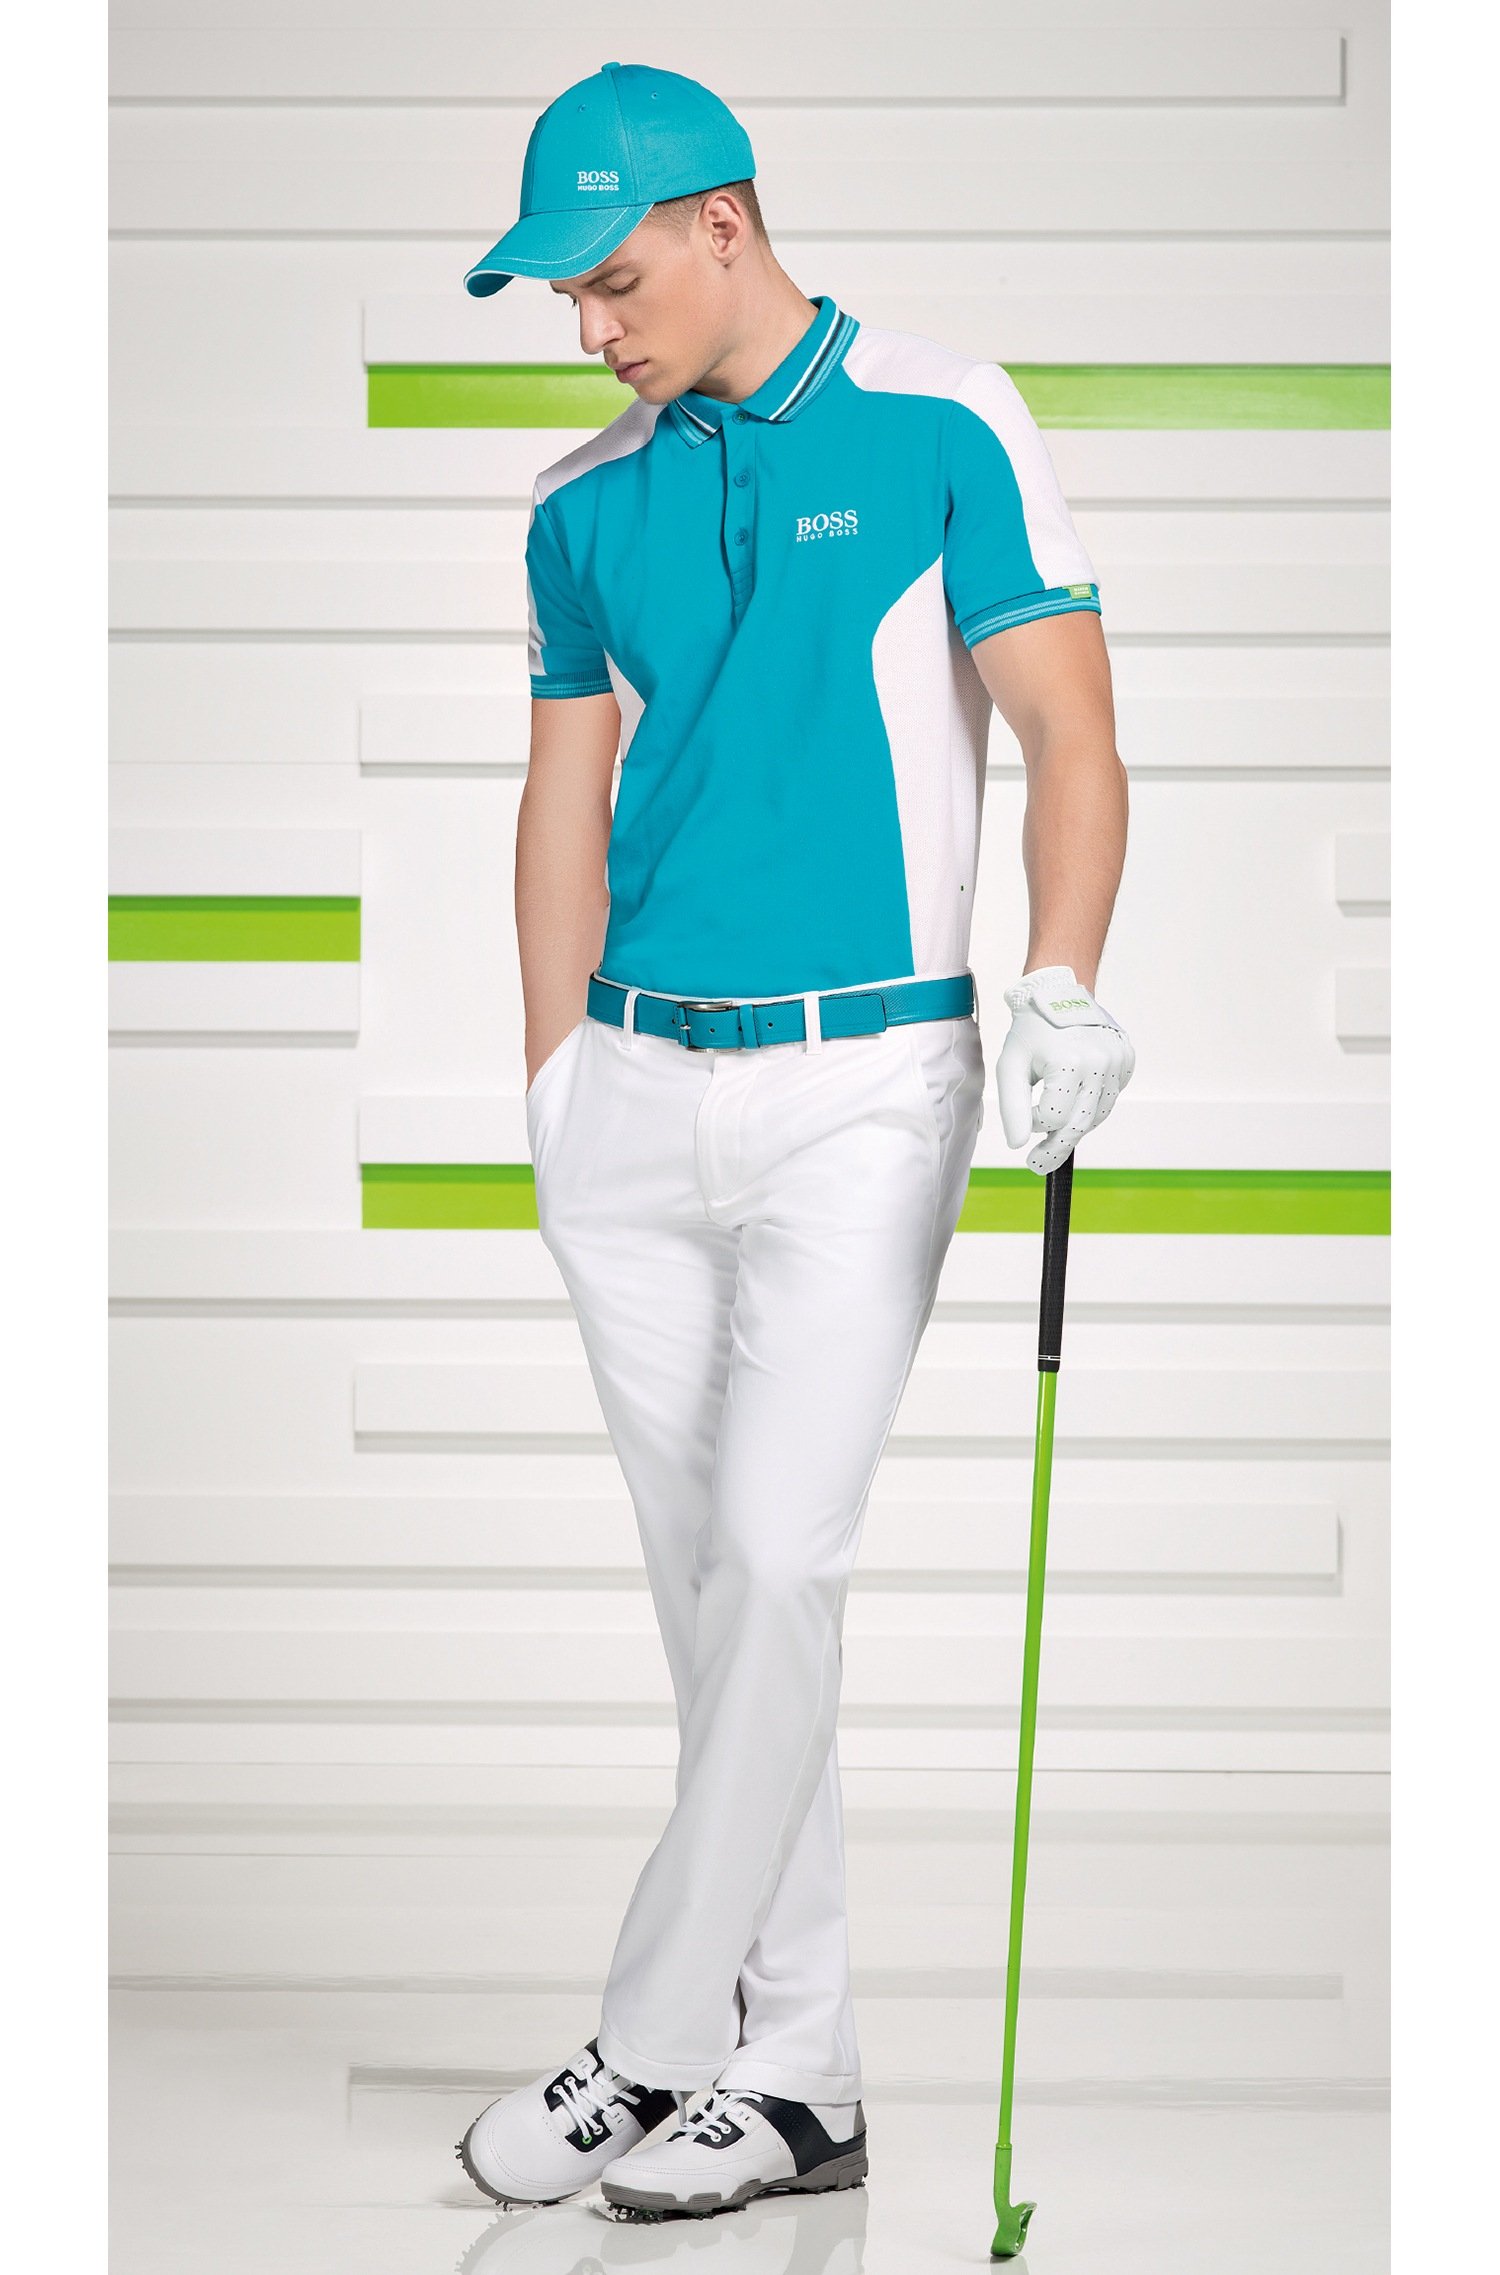 What sports do you dislike and why? Boss-green-white-hakan-slim-fit-coolmax-performance-golf-pants-product-0-910141073-normal